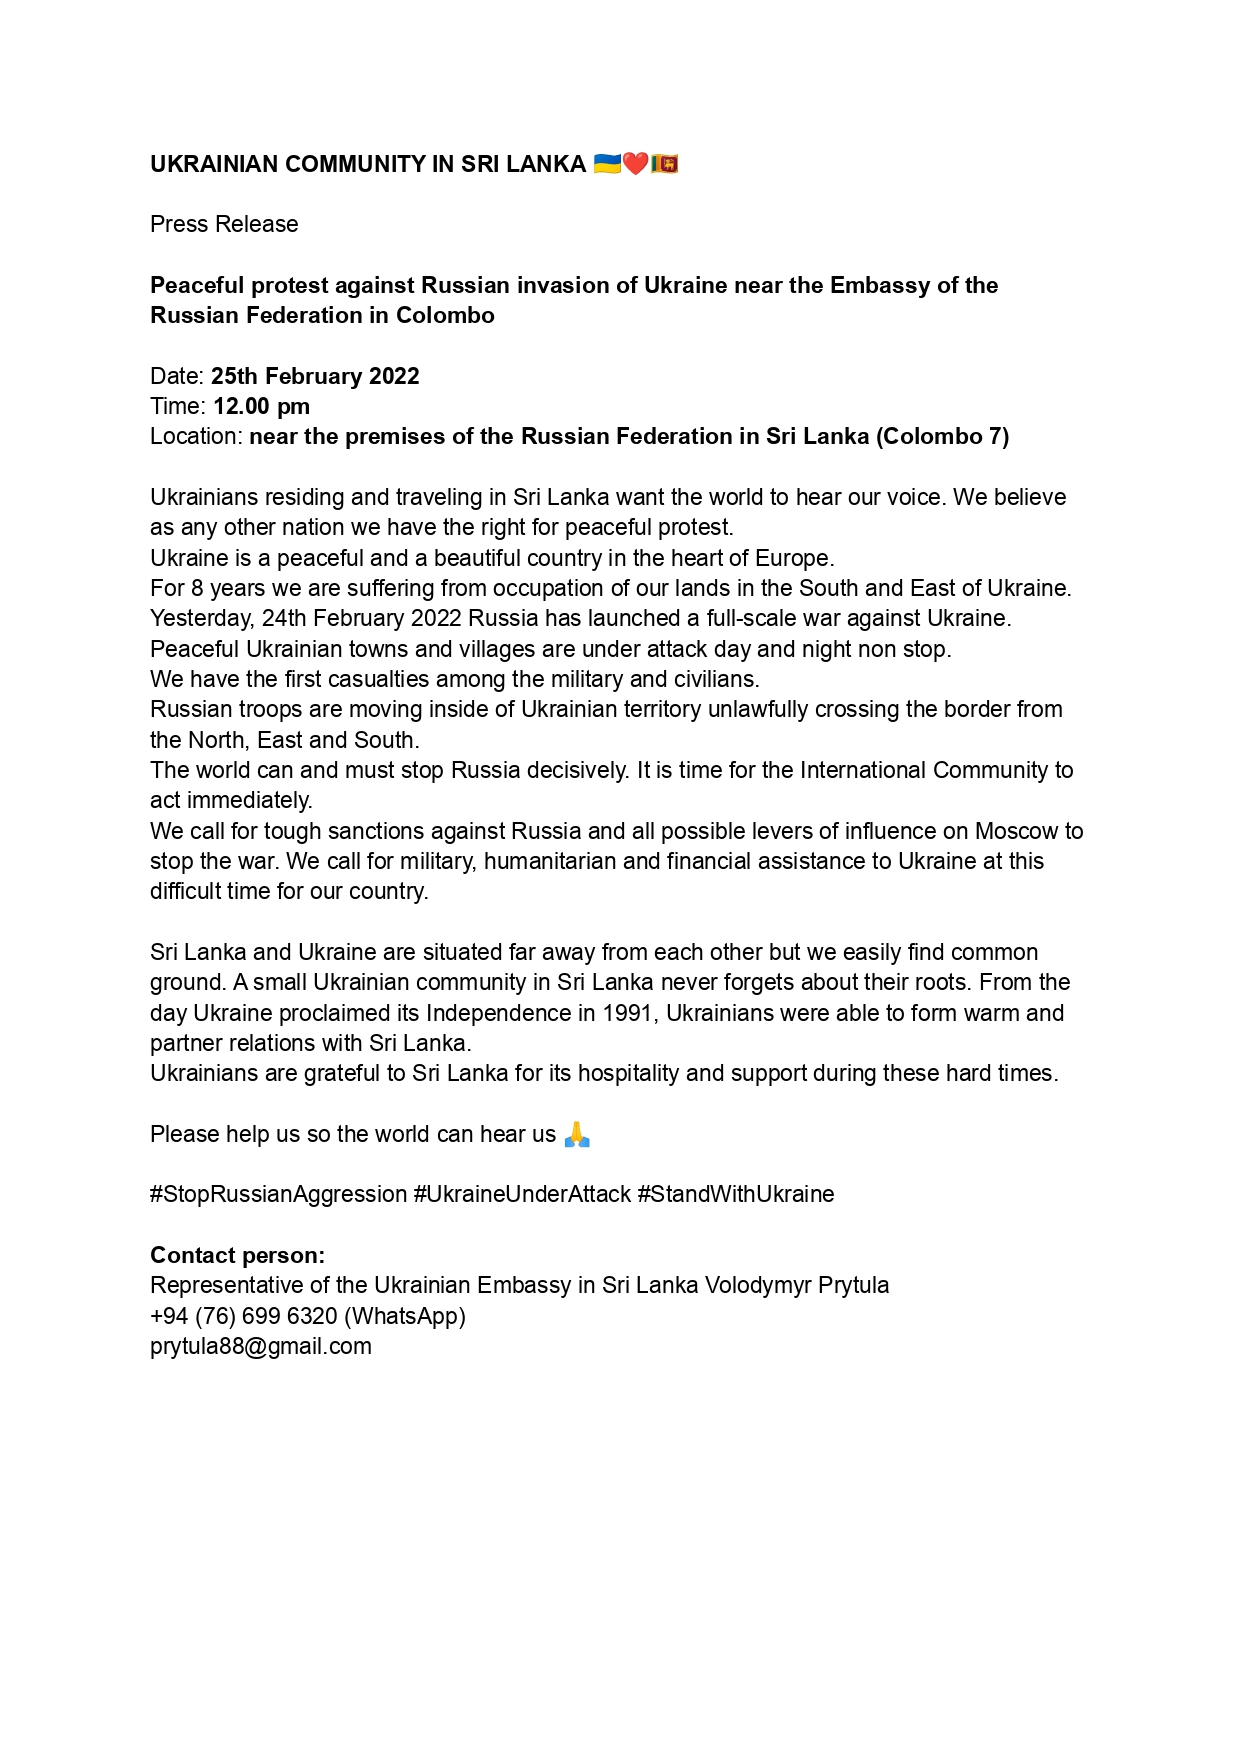 Press Release Peaceful protest against Russian aggression page 0001